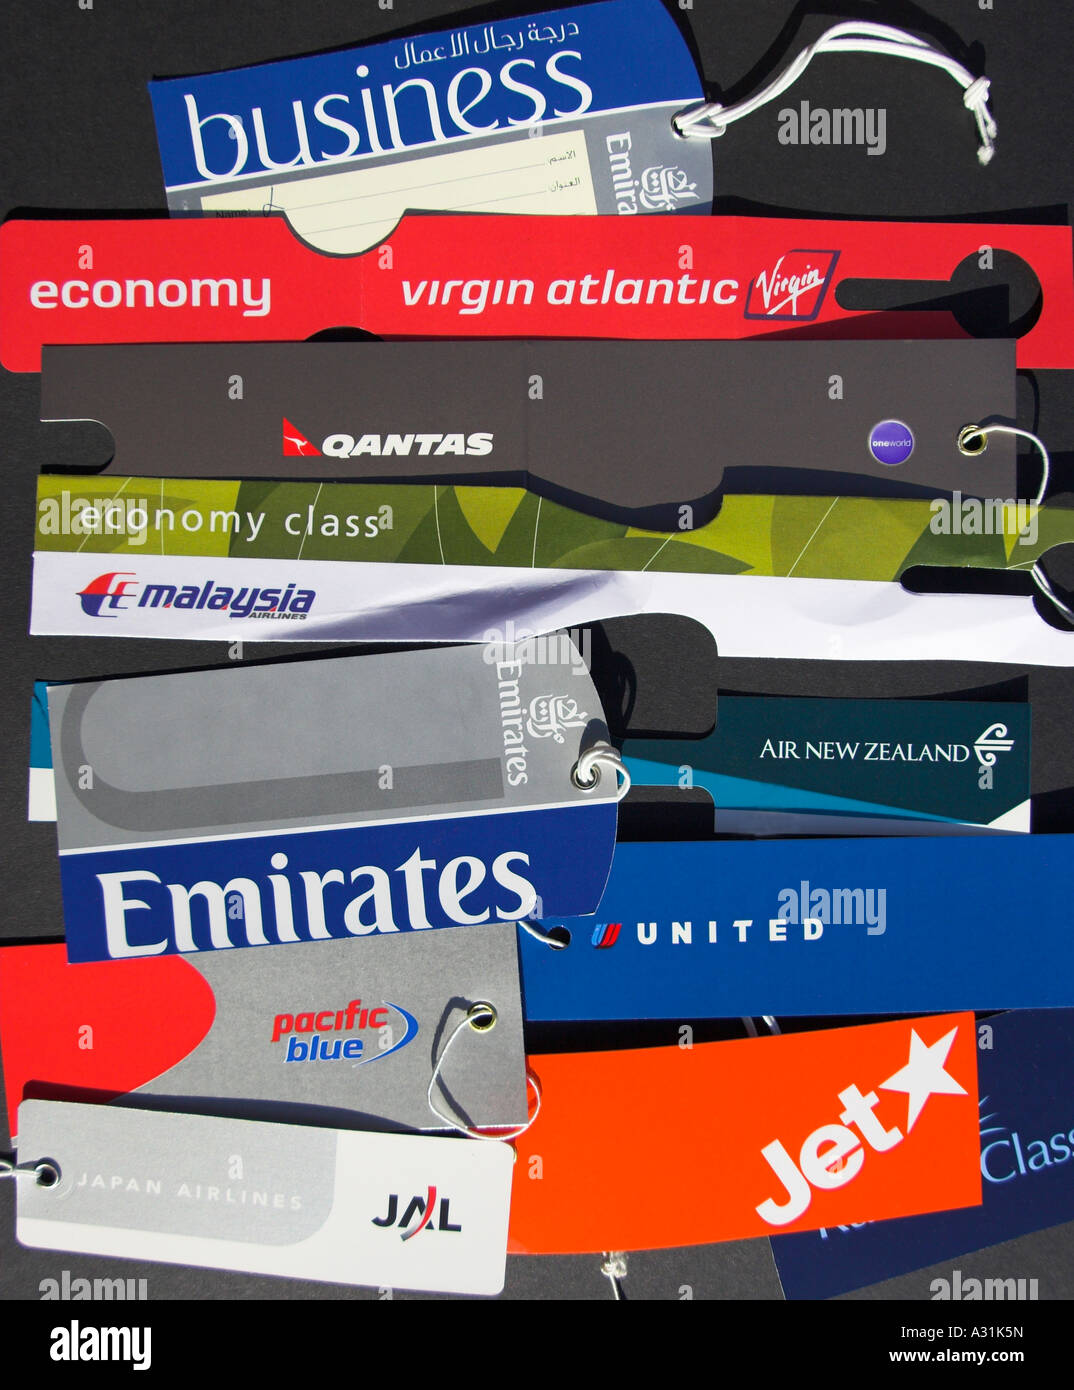 Details more than 70 airline bag tags best - esthdonghoadian